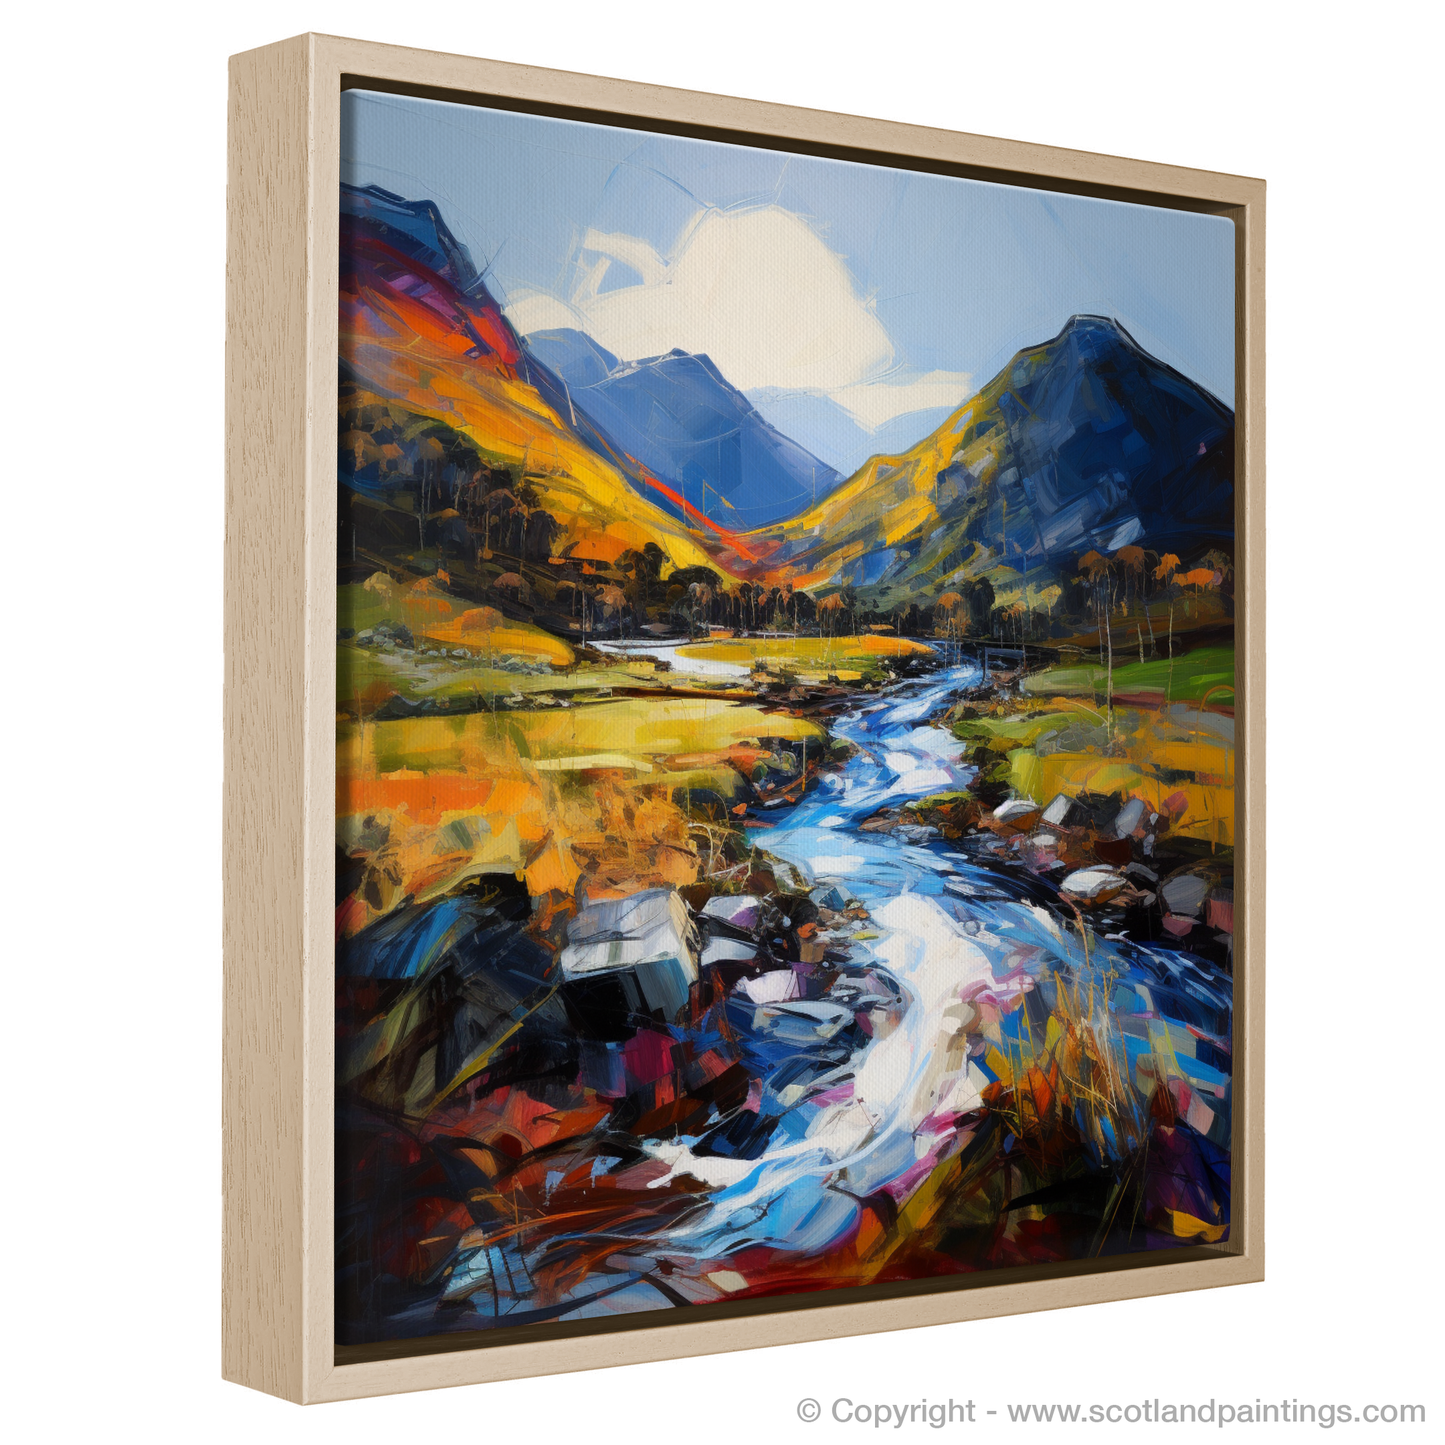 Painting and Art Print of Glen Esk, Angus entitled "Wild Essence of Glen Esk: An Expressionist Ode to the Scottish Highlands".